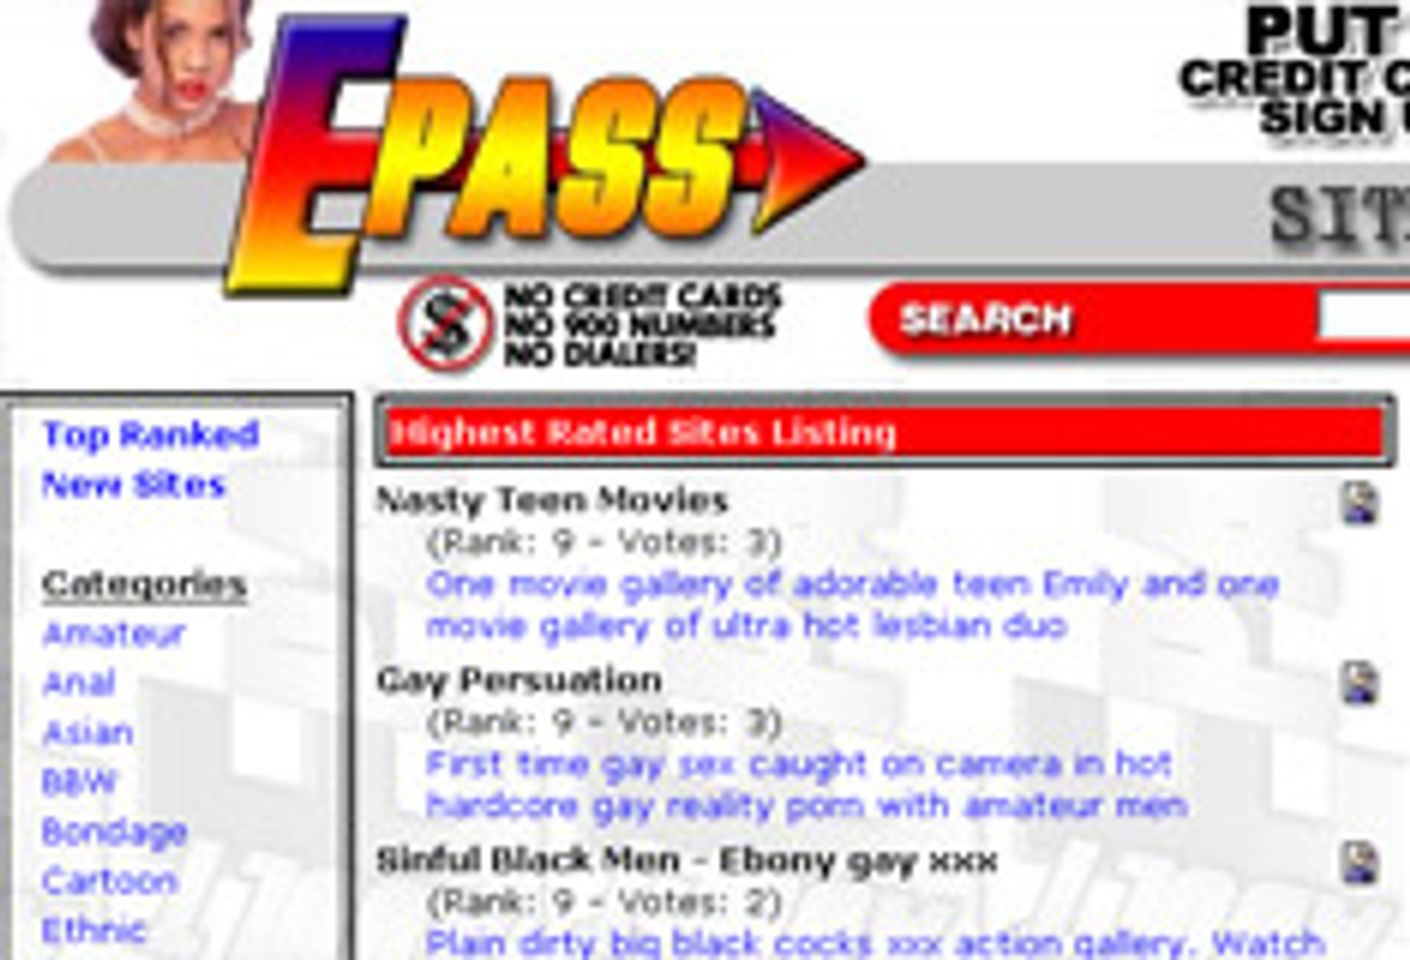 PhotoVision Selling AdultEPass, Other Domains